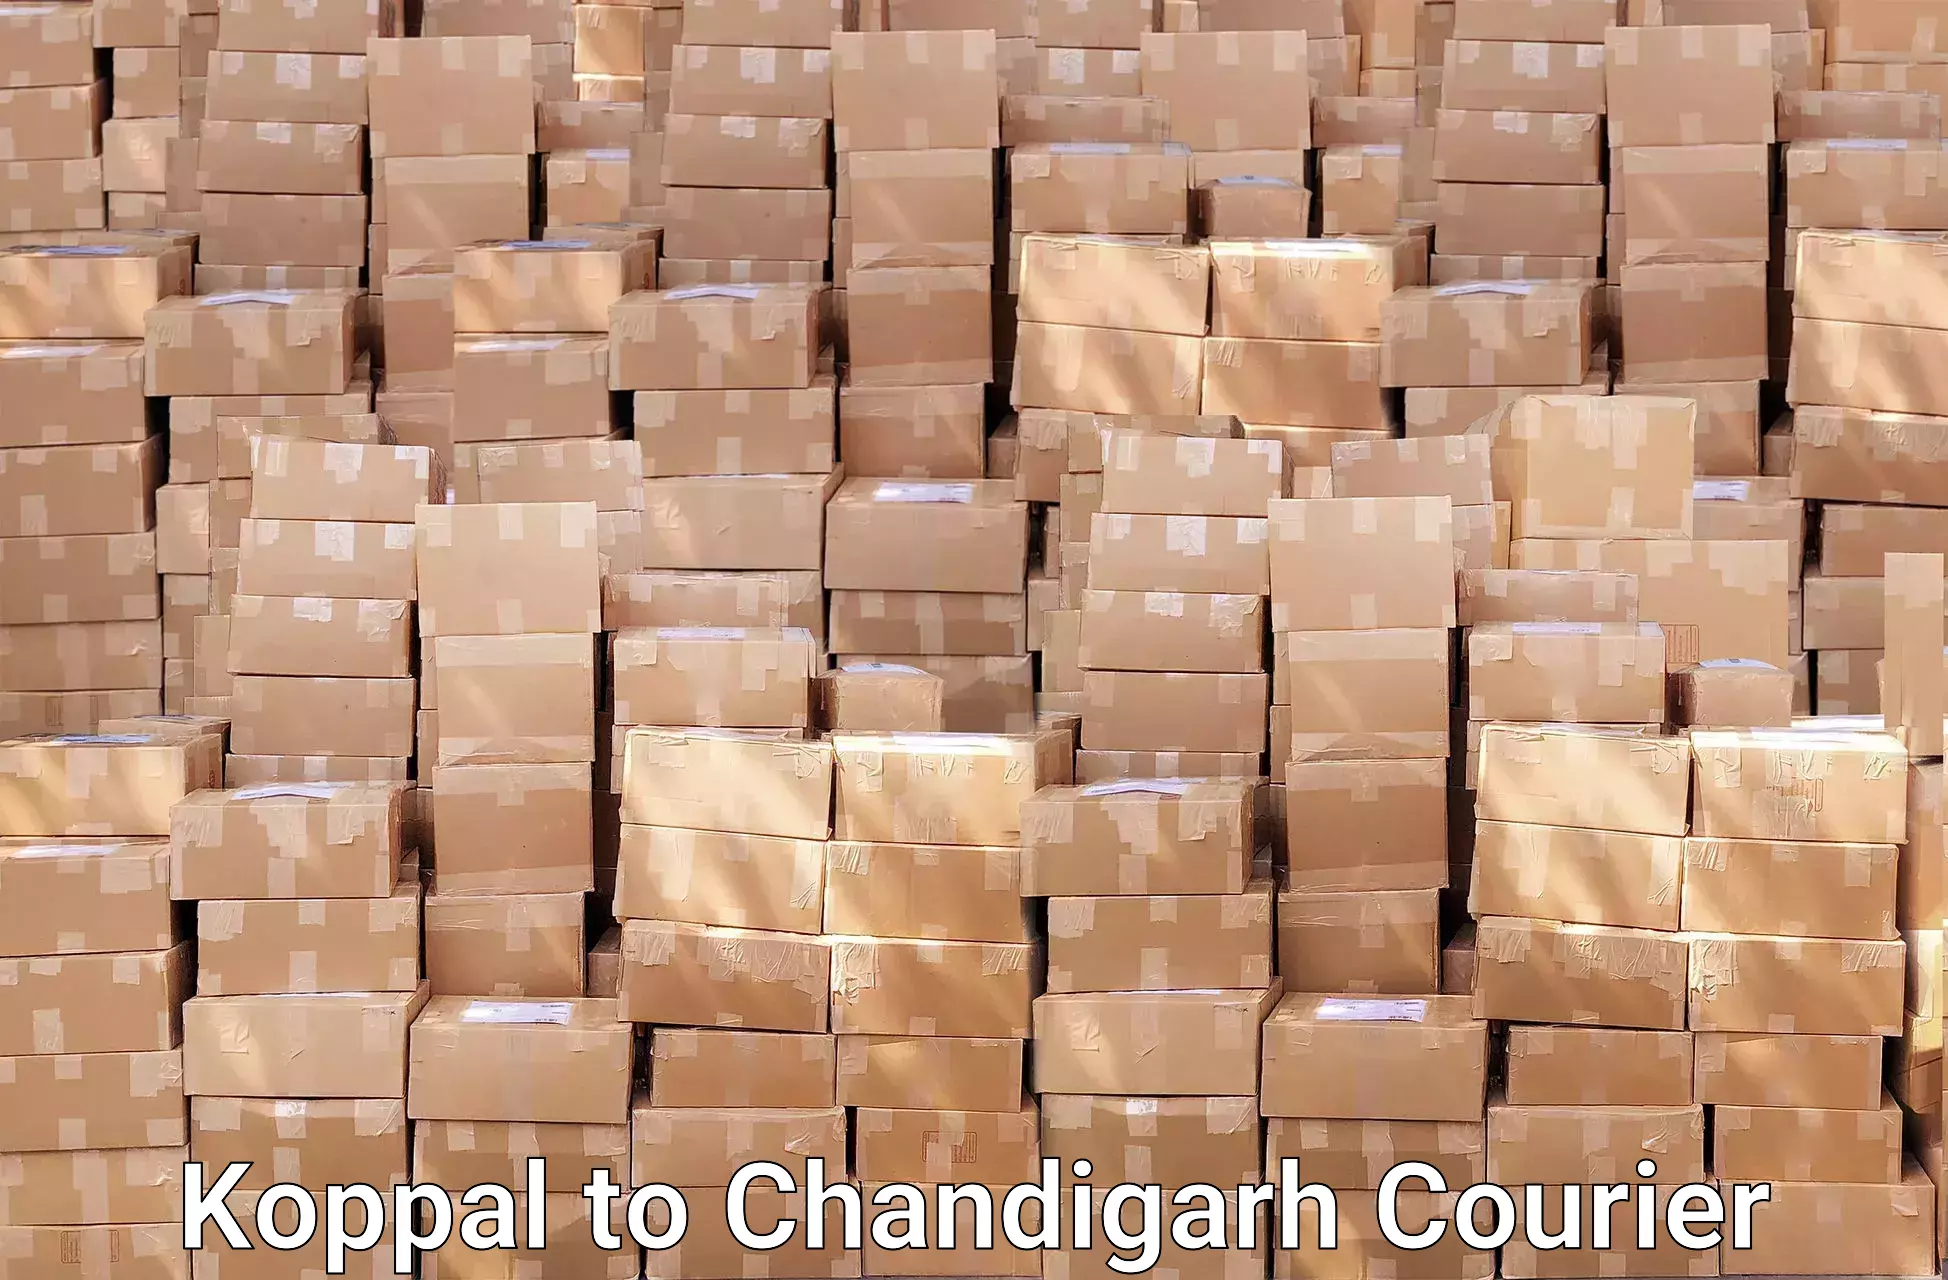 Furniture delivery service Koppal to Chandigarh